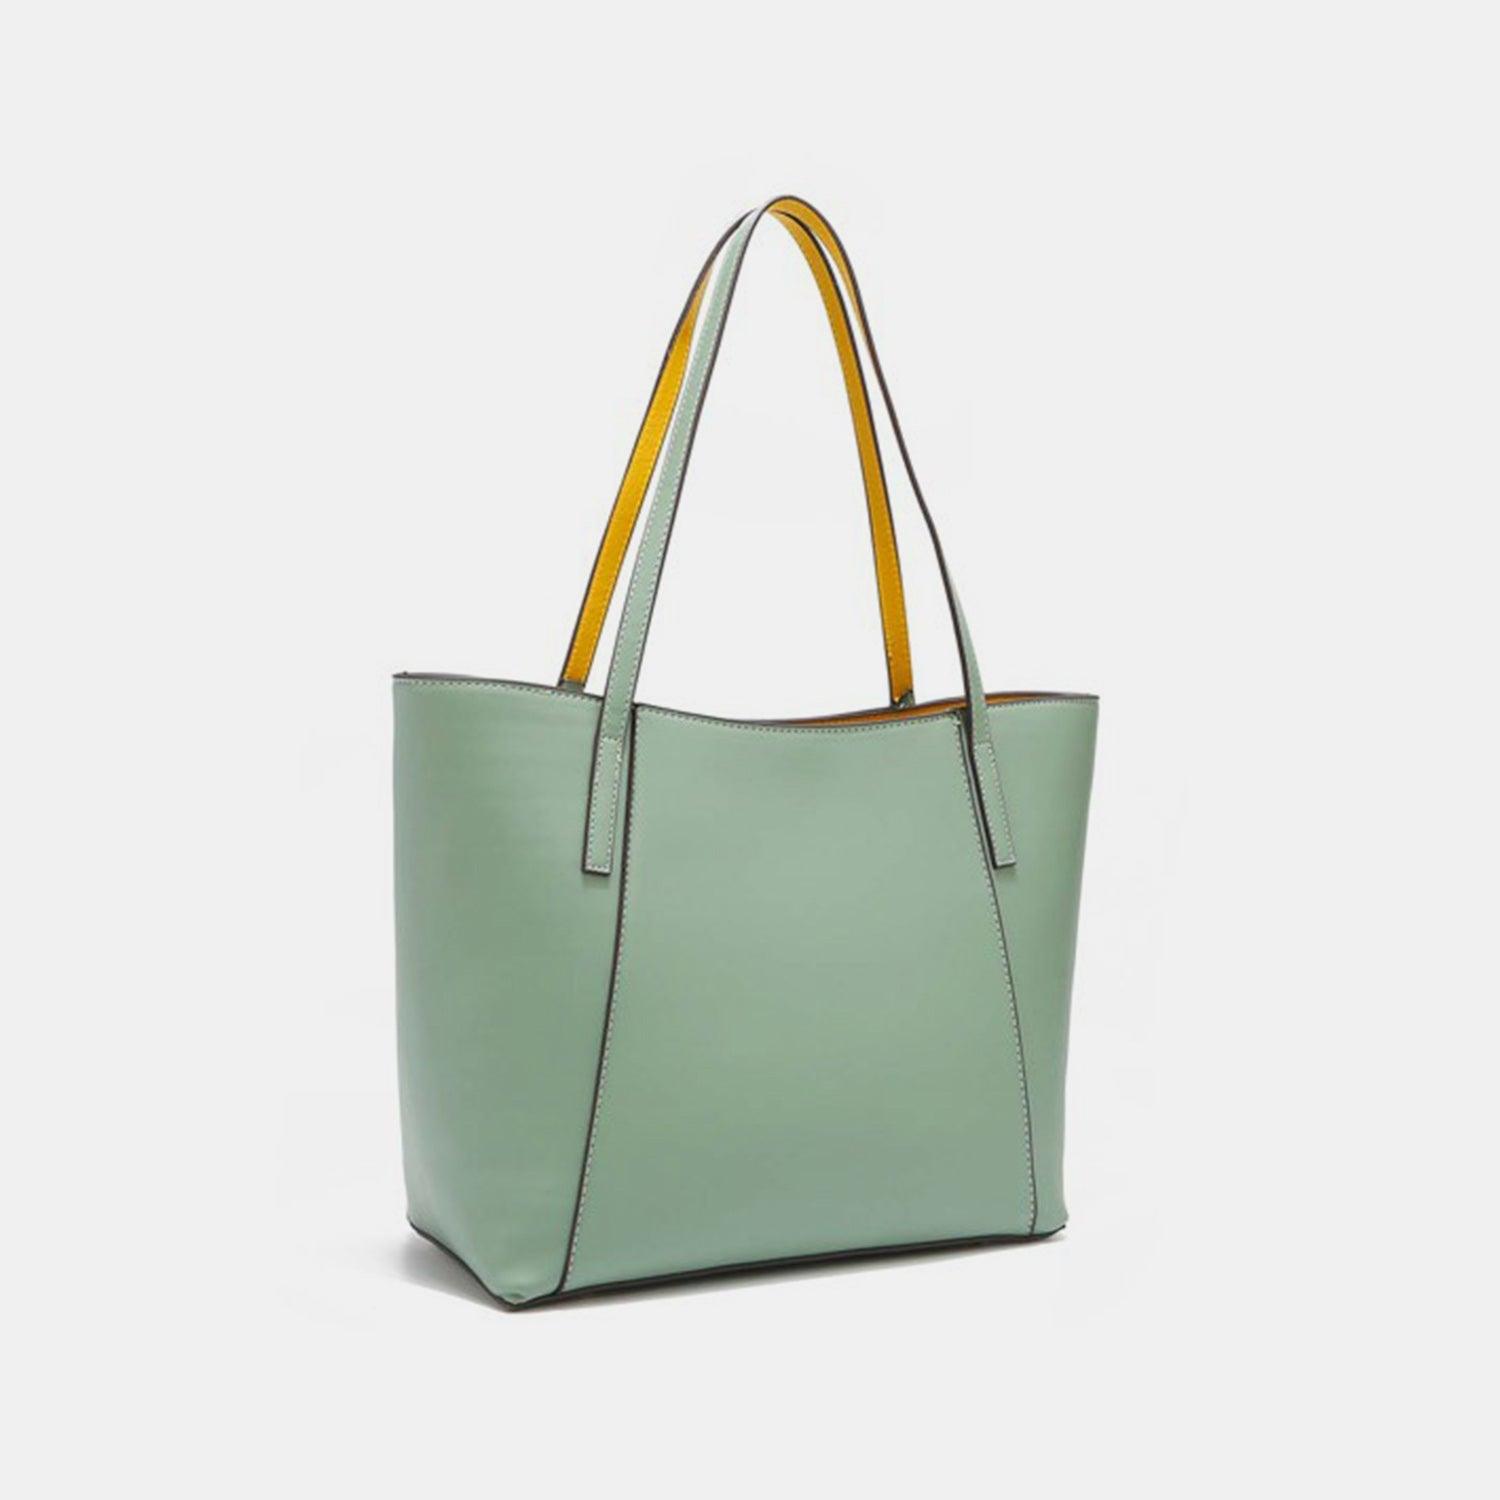 a green tote bag with a yellow handle